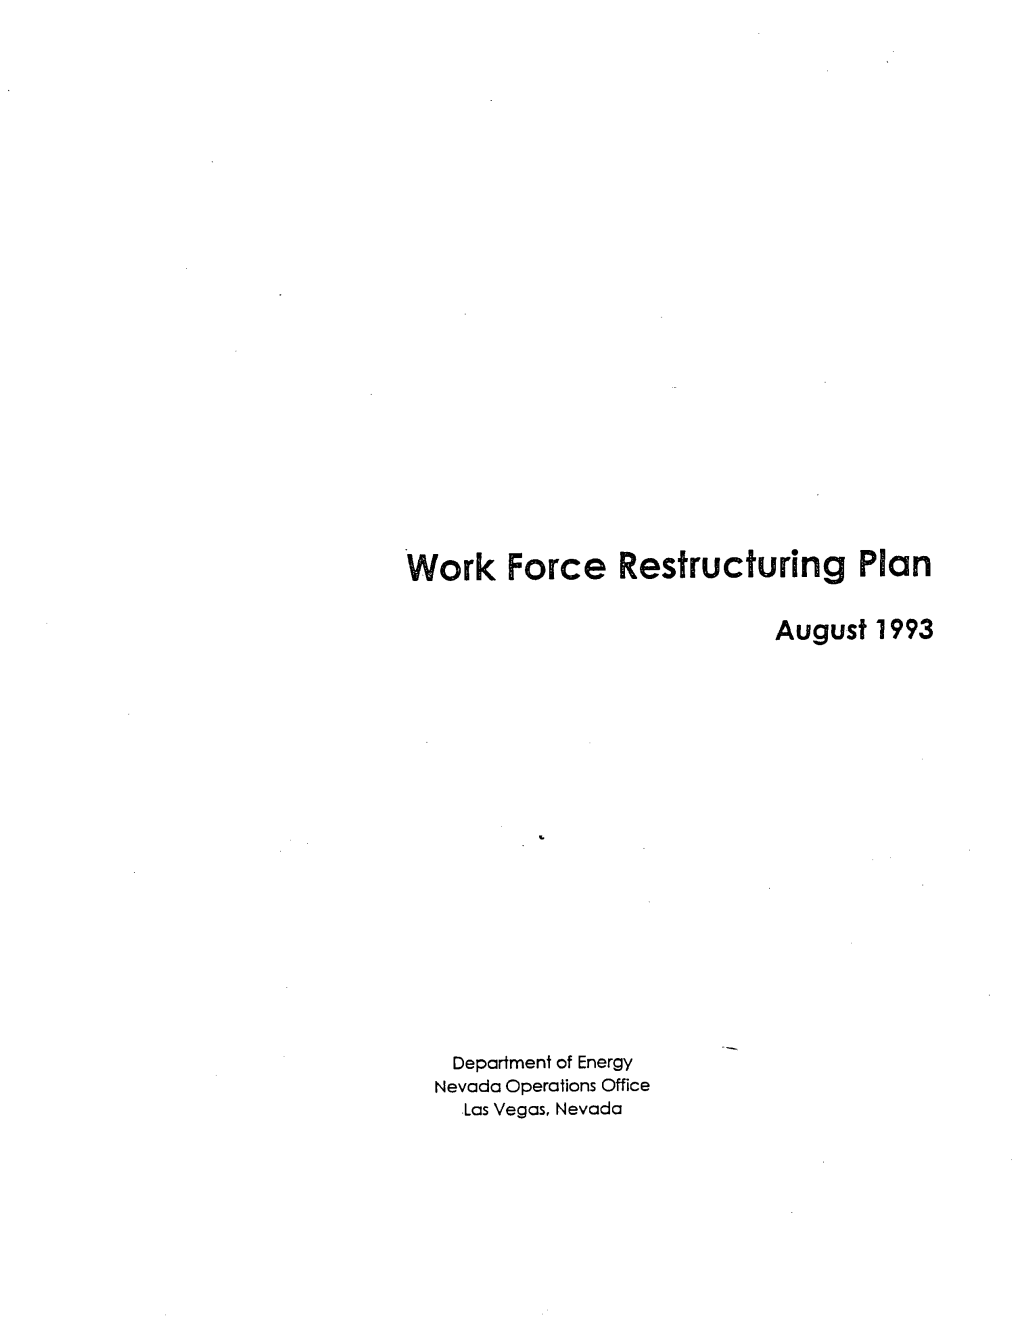 Work Force Restructuring Plan August 1993